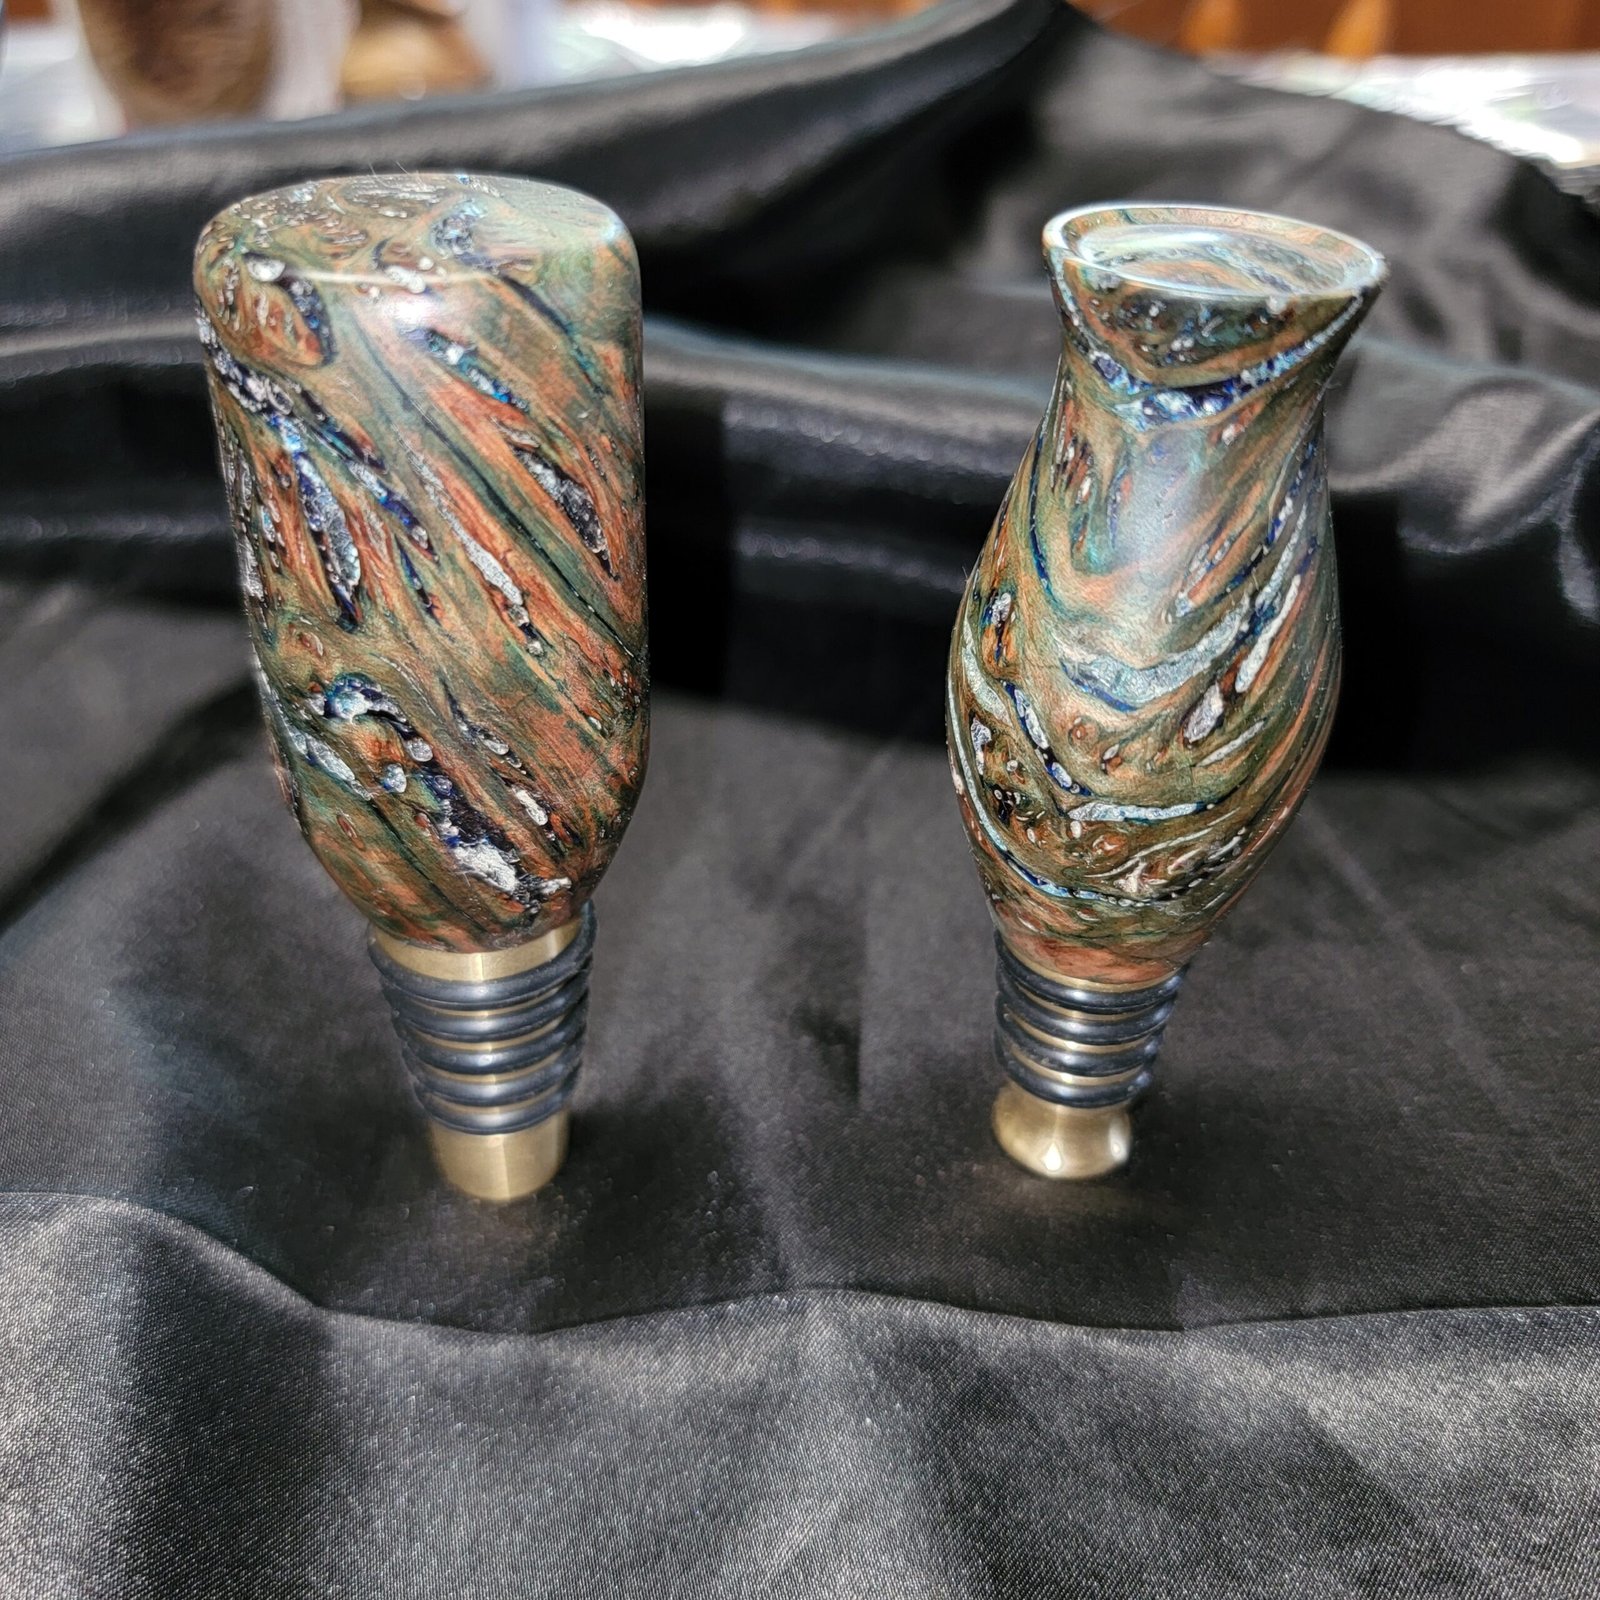 Dyed and Stabilized Redwood Burl Medium Whiskey and Wine Bottle Stoppers (pair)